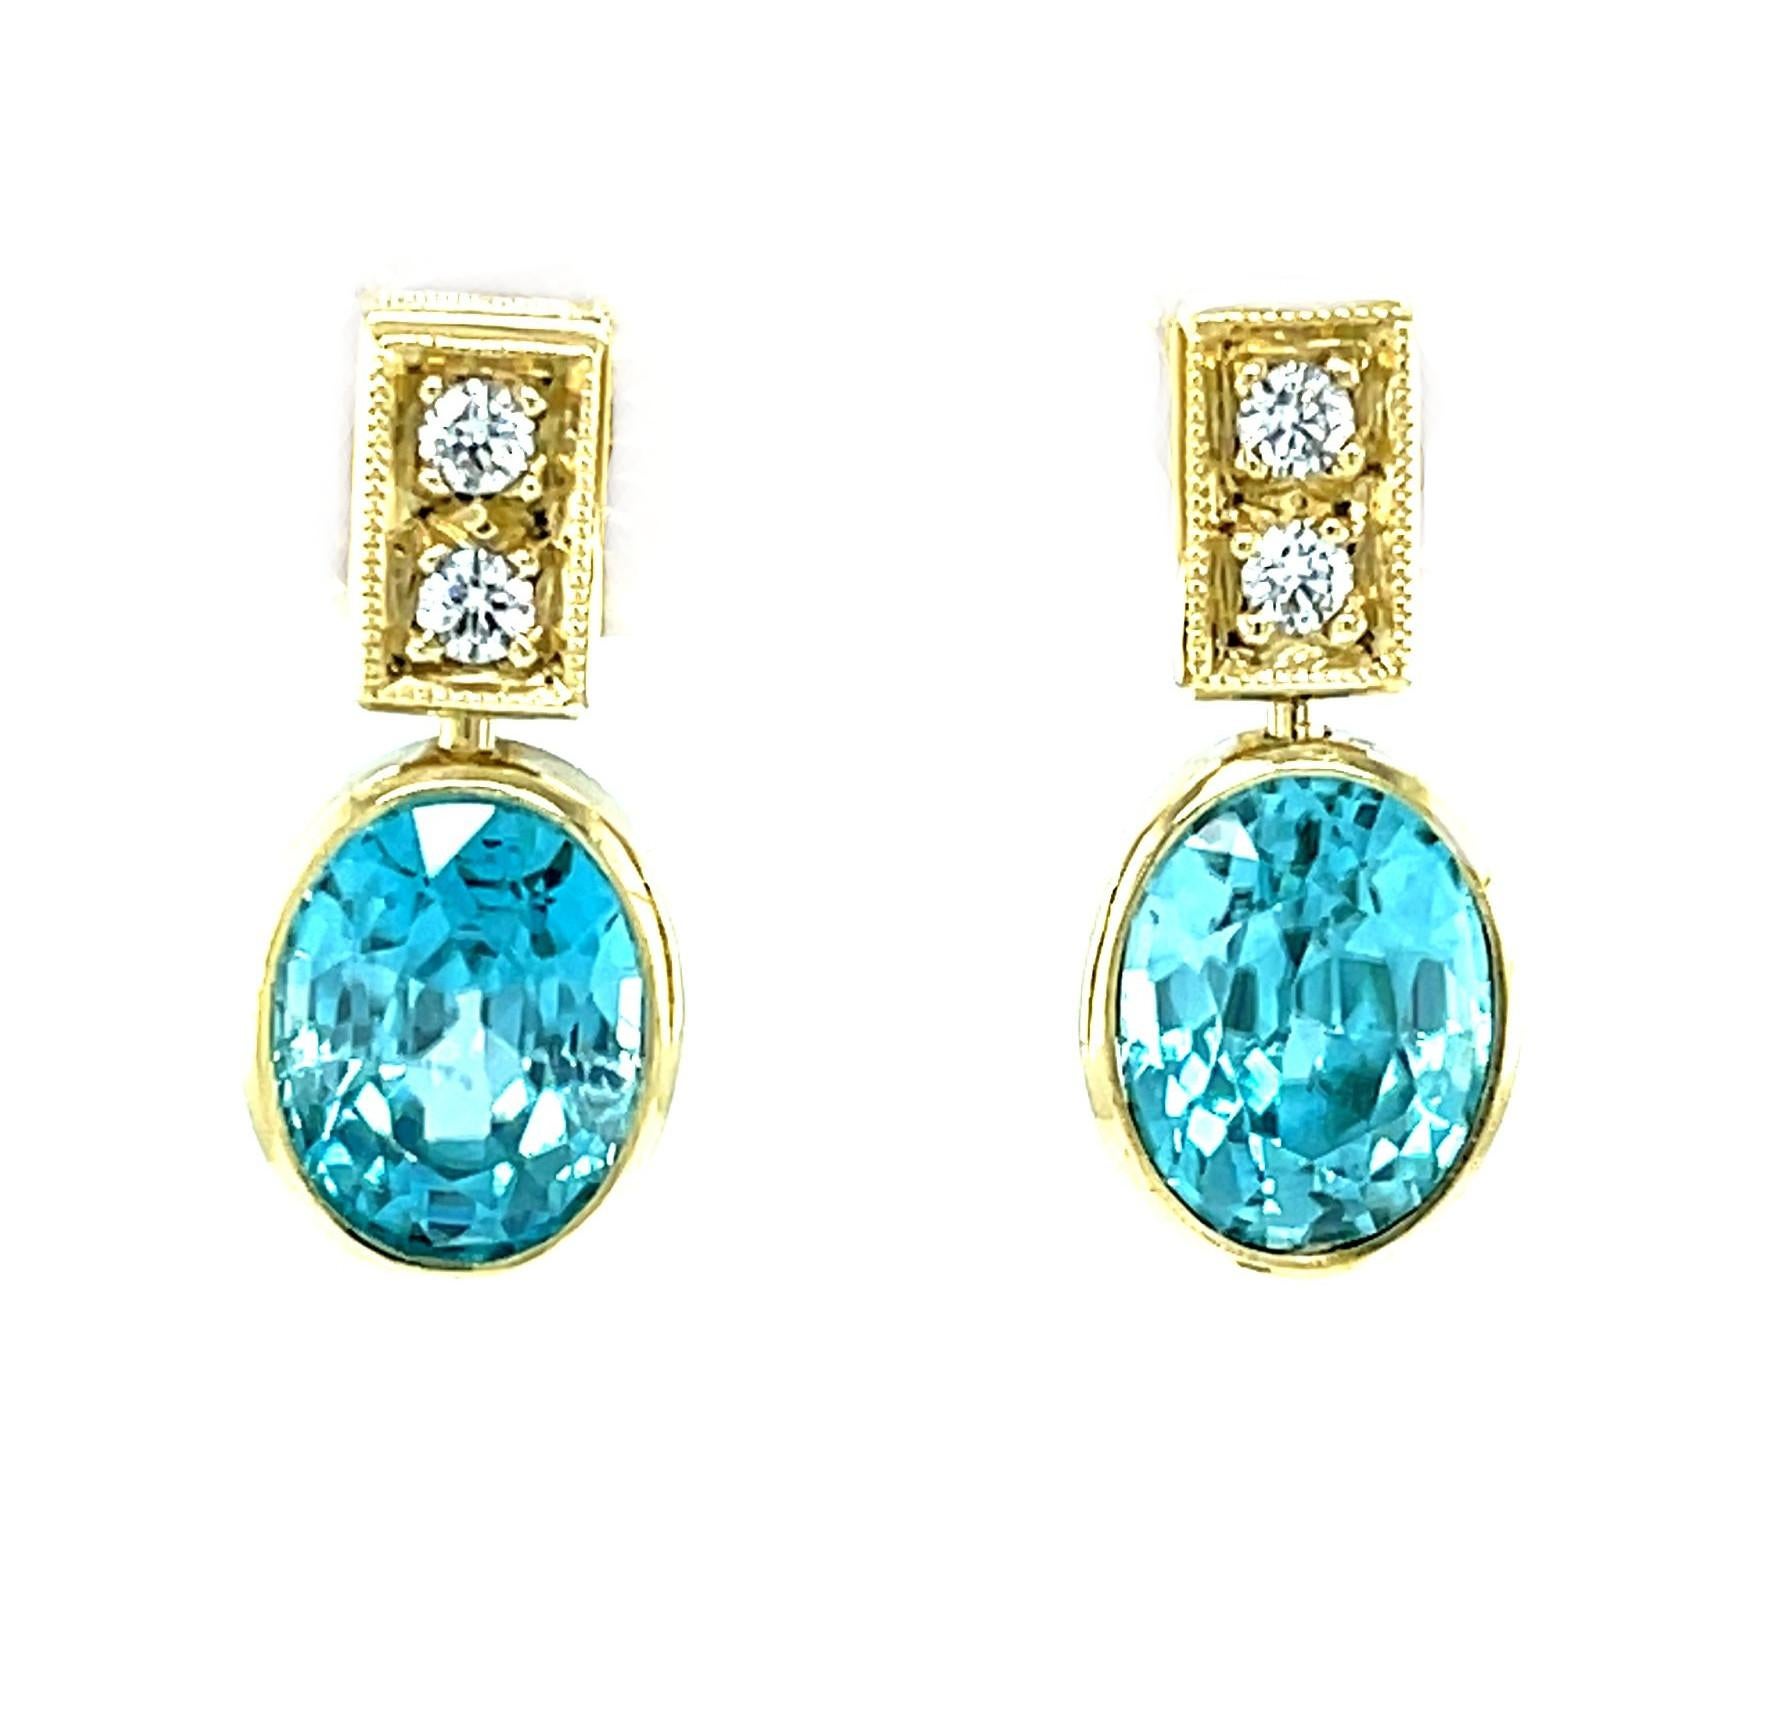 These gorgeous blue zircon and diamond earrings feature a stunning pair of beautifully matched, vibrant blue zircons that have a combined weight of 9.38 carats. Blue zircons are known for spectacular brilliance and this pair of lovely ovals has been